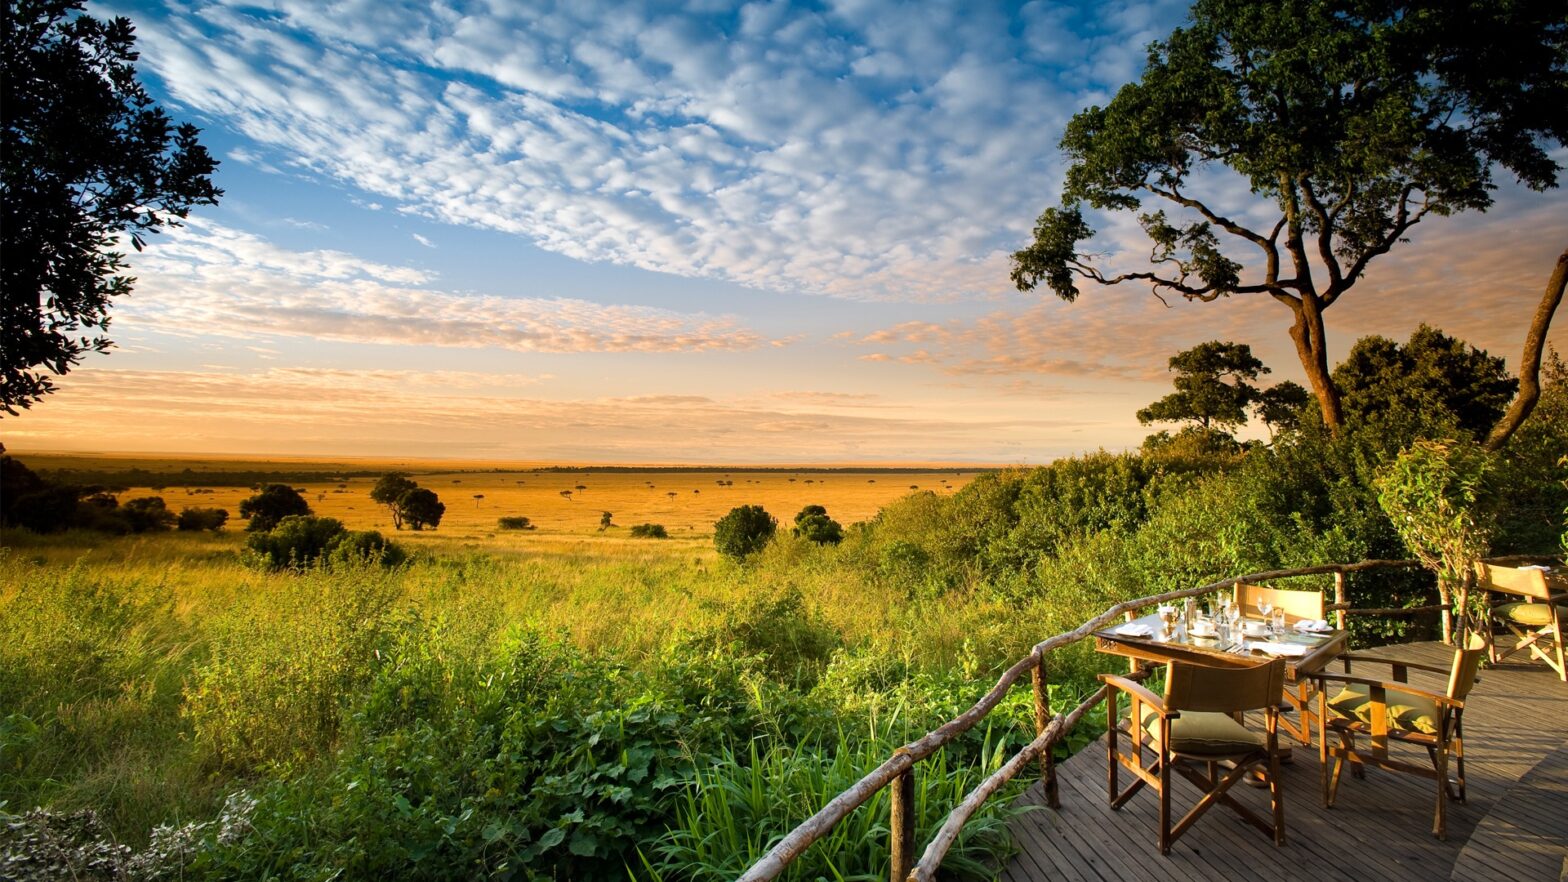 andBeyond Bateleur Camp can be part of a tailor made vacations southern kenya trip